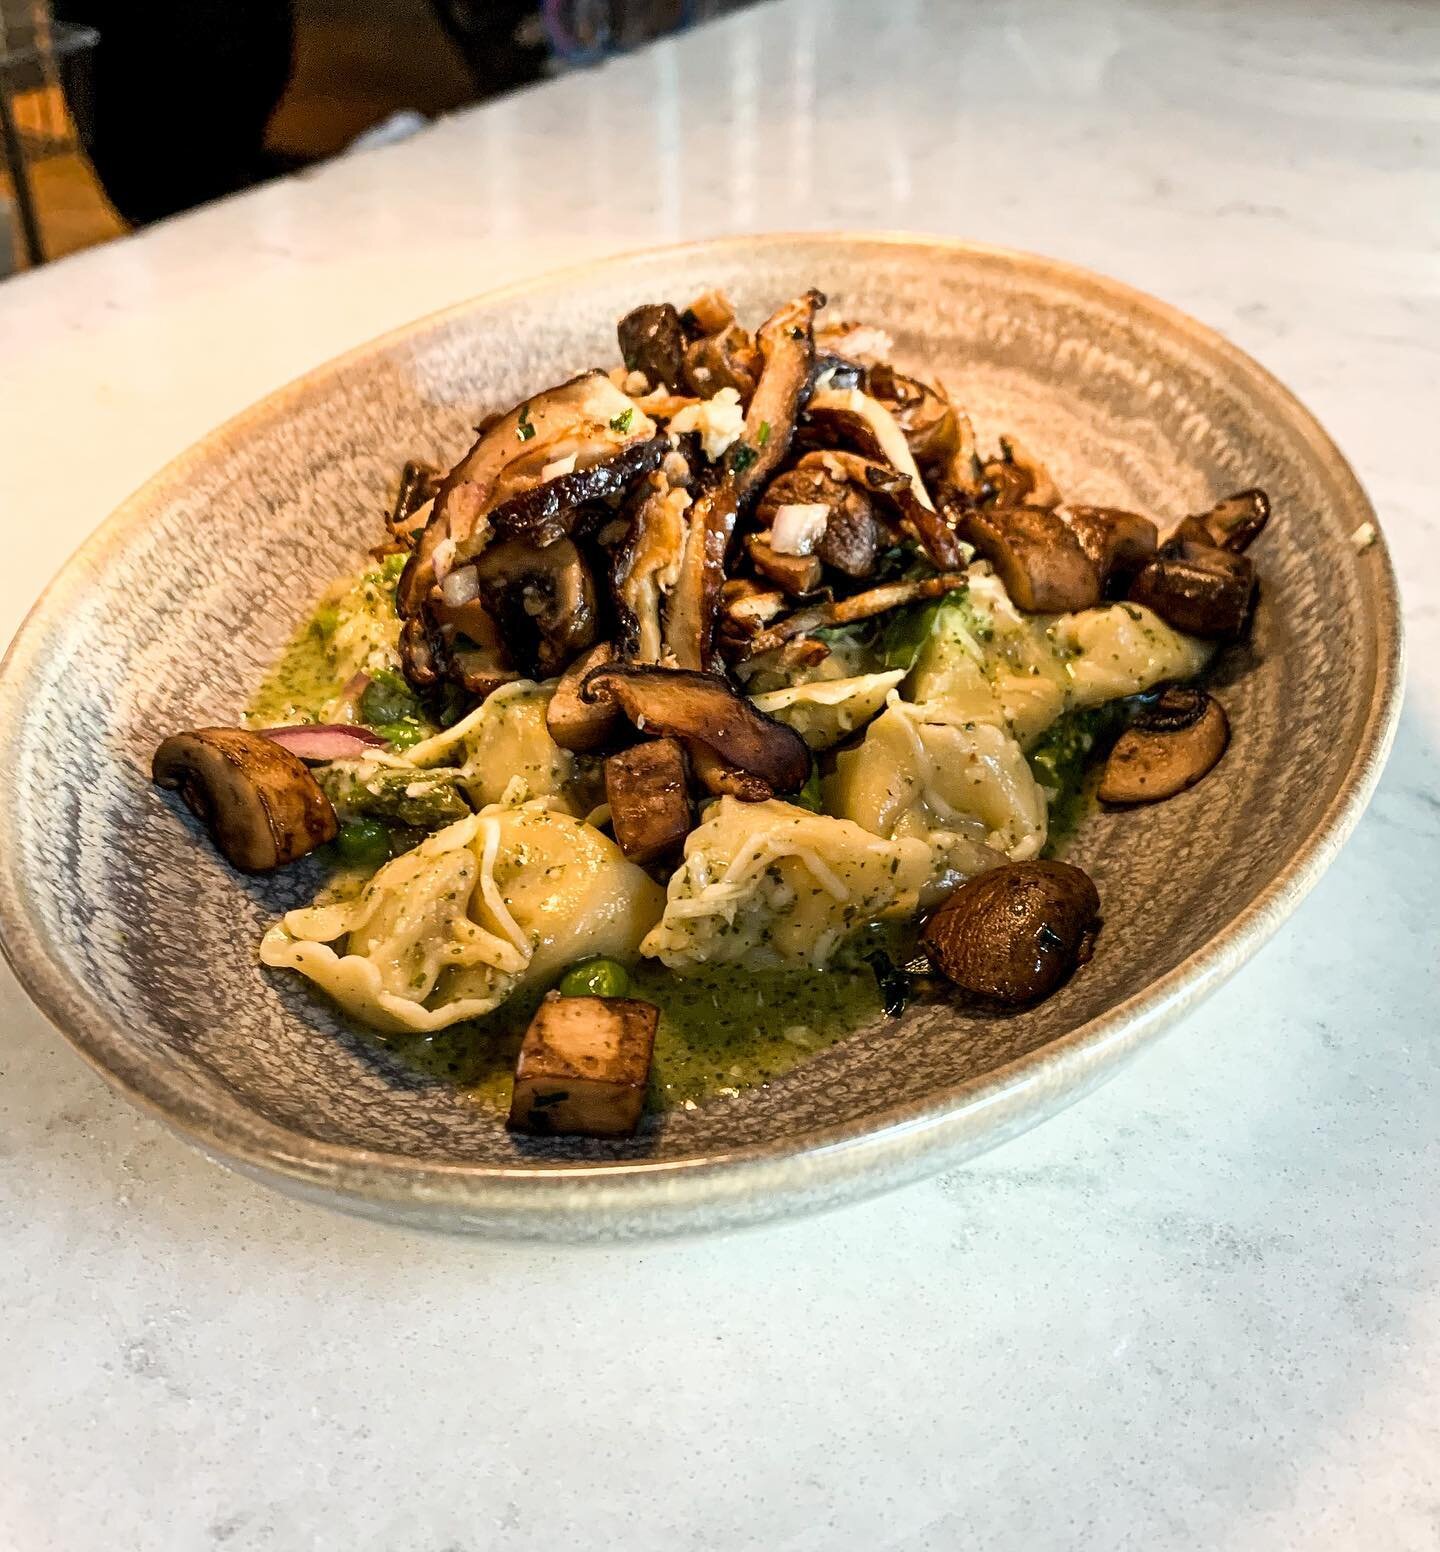 Are you ready for a new special!!😁
Five Cheese Tortellini with pesto sauce, mushrooms, peas, asparagus and onions!!🍄🧅
Be one the first guests to try it!!